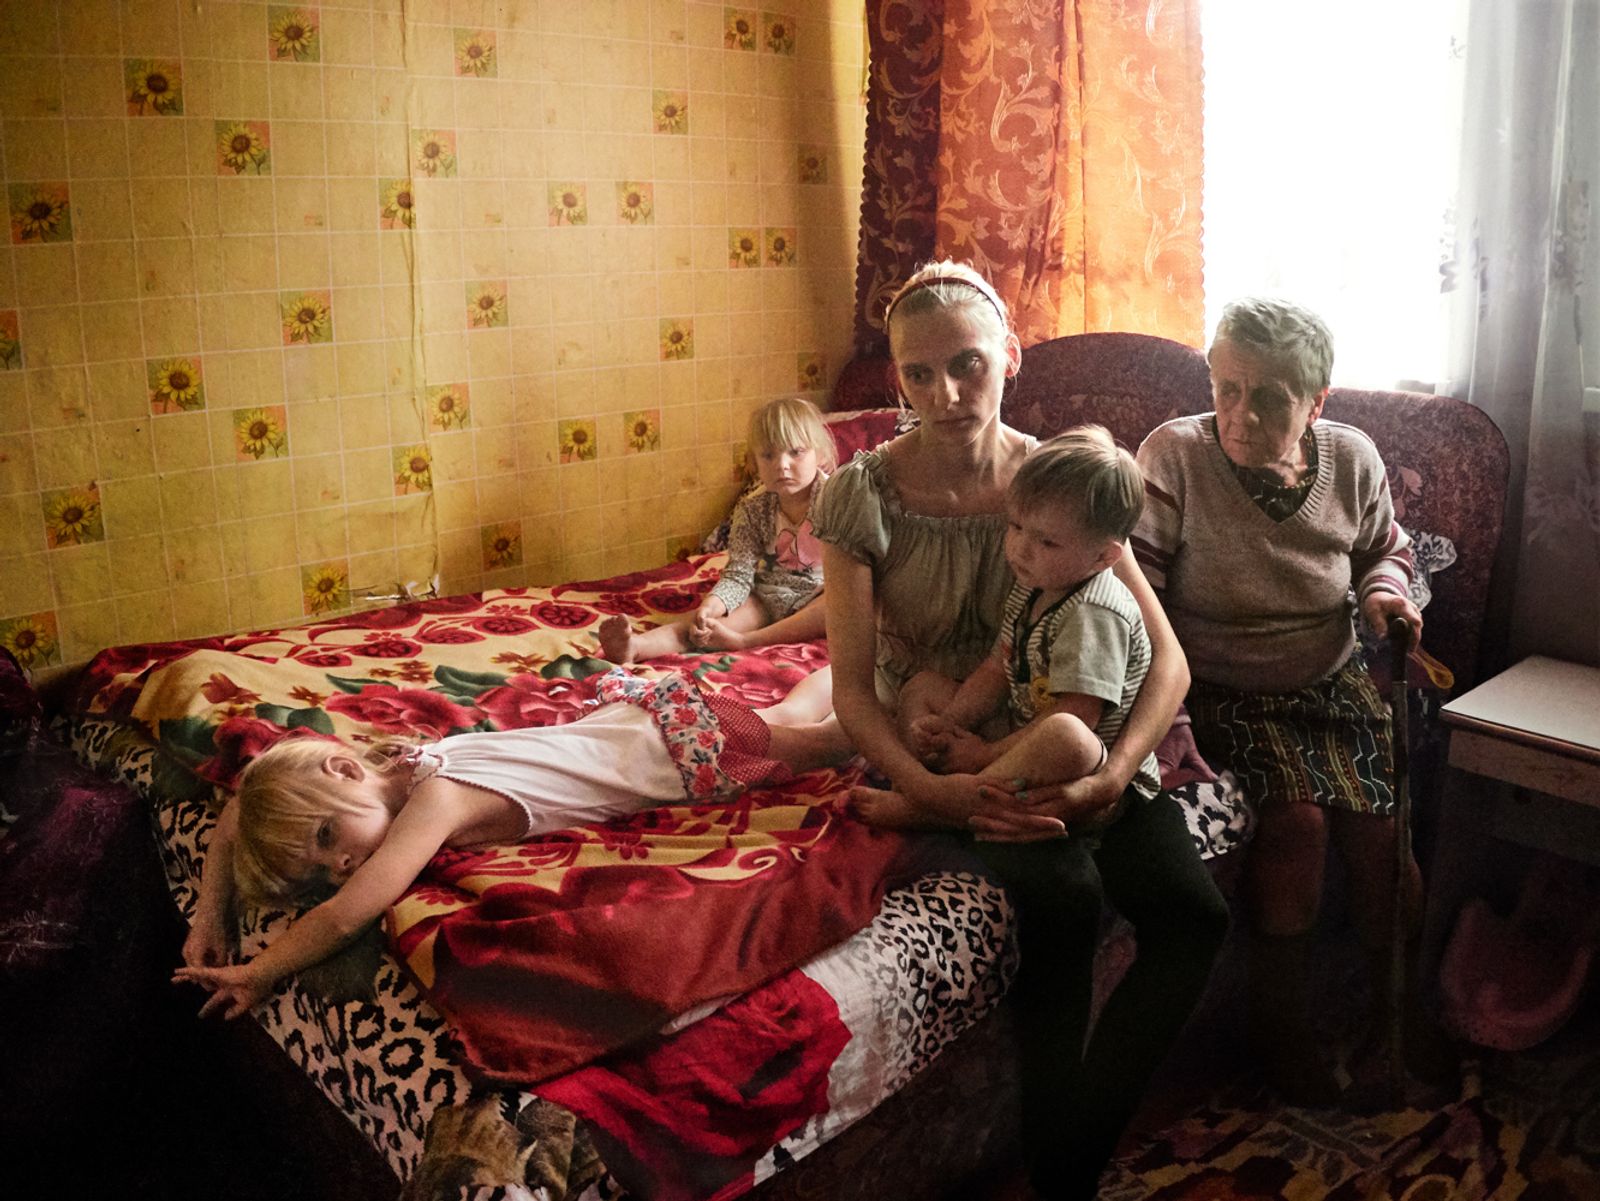 © Alfredo Bosco - Image from the Donbass: No Man's Land photography project